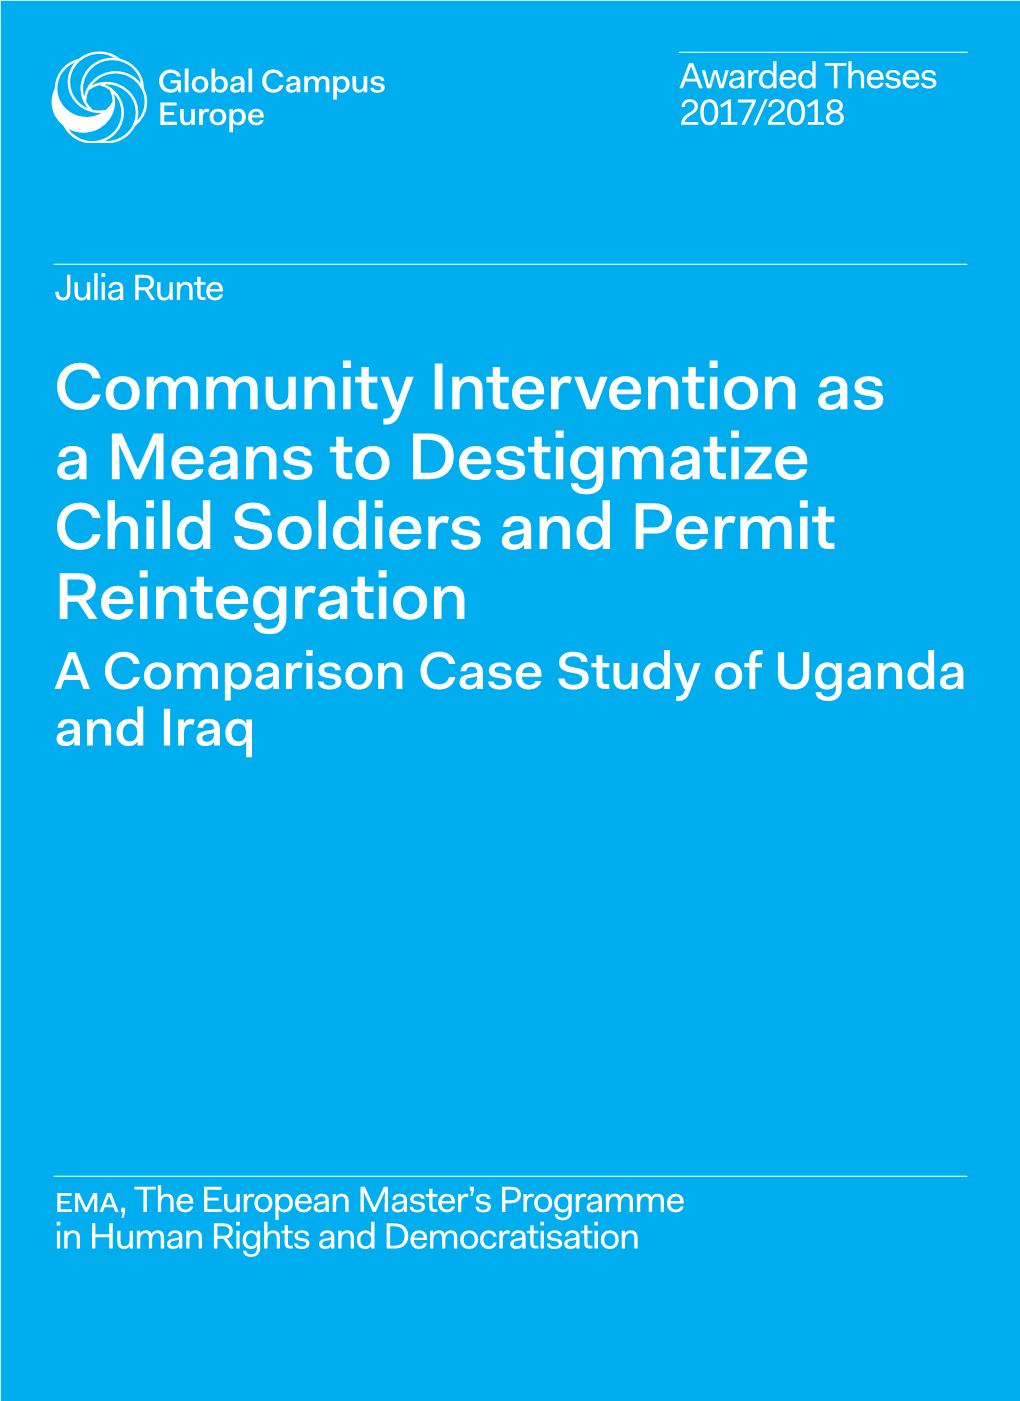 Community Intervention As a Means to Destigmatize Child Soldiers and Permit Reintegration a Comparison Case Study of Uganda and Iraq